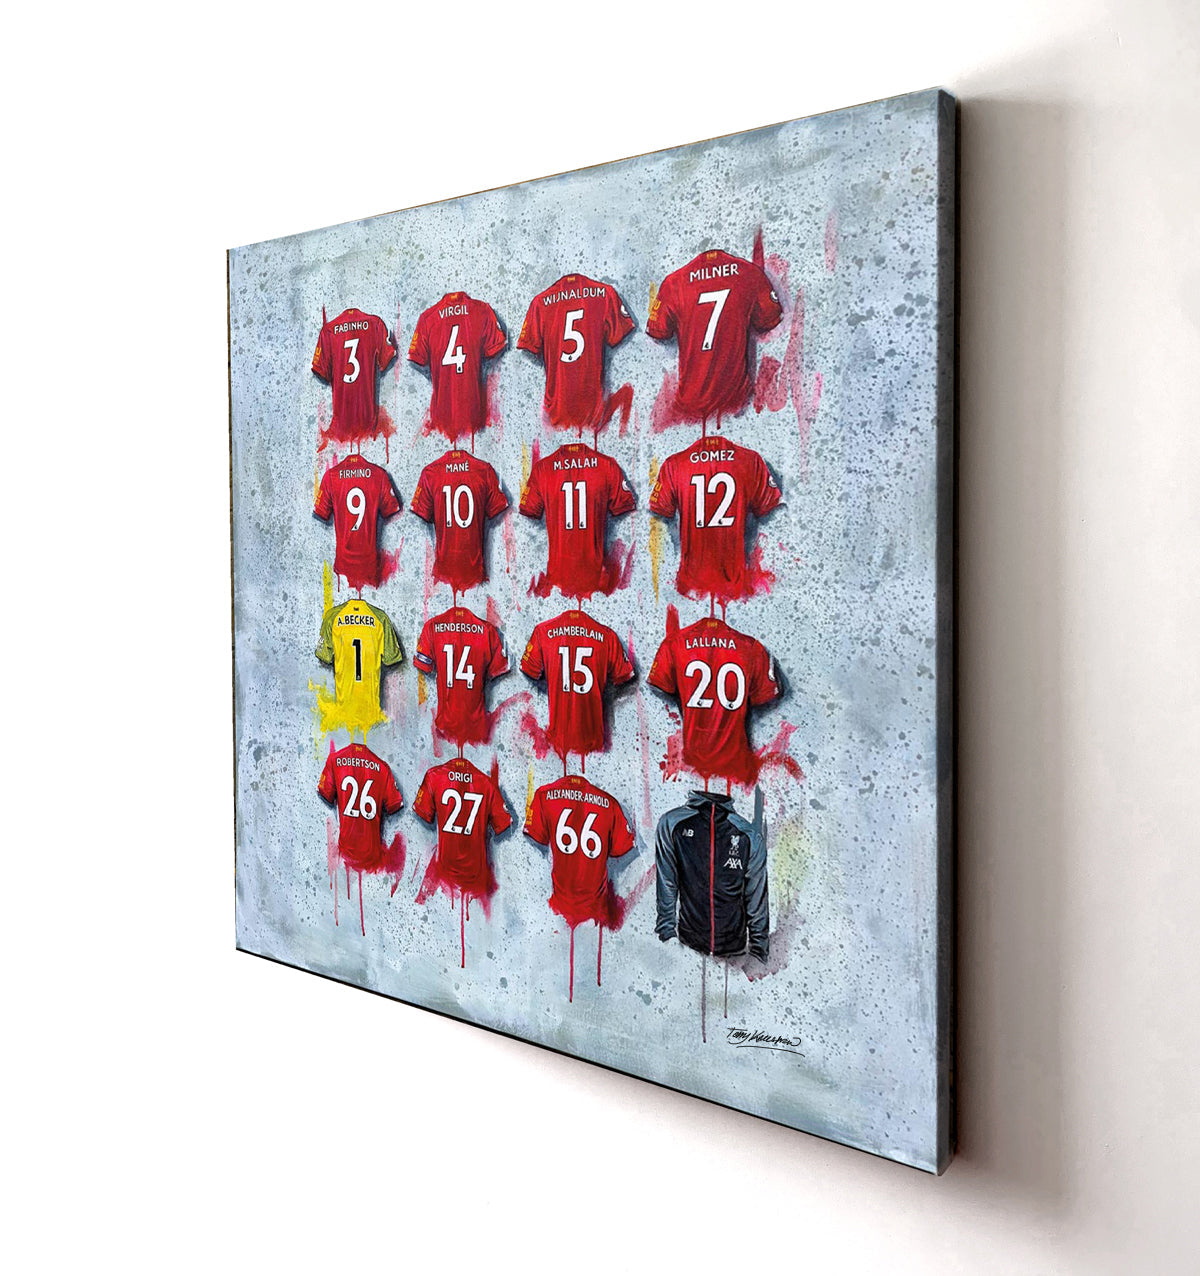 These Liverpool Champions canvases from Terry Kneeshaw are available in various sizes (20x20, 30x30 or 40x40) and framed or unframed in a black floating frame. The artwork features stunning images of the team and its players celebrating their recent triumphs, perfect for any fan or collector. Add a touch of the Reds to your home or office decor with these high-quality canvases and celebrate the team's success in style.